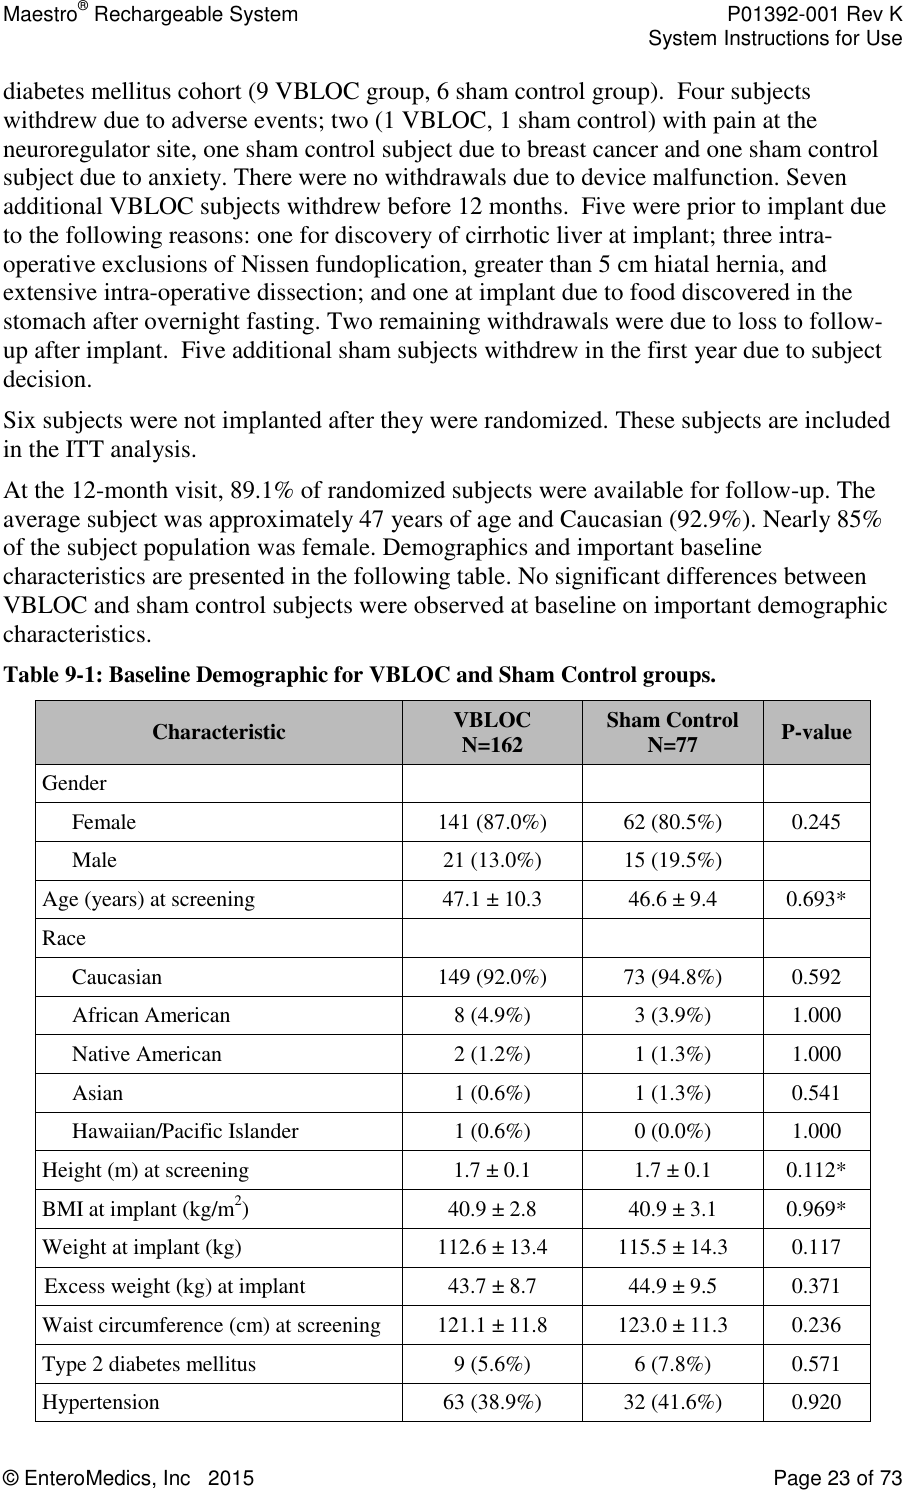 Maestro® Rechargeable System    P01392-001 Rev K     System Instructions for Use  © EnteroMedics, Inc   2015  Page 23 of 73  diabetes mellitus cohort (9 VBLOC group, 6 sham control group).  Four subjects withdrew due to adverse events; two (1 VBLOC, 1 sham control) with pain at the neuroregulator site, one sham control subject due to breast cancer and one sham control subject due to anxiety. There were no withdrawals due to device malfunction. Seven additional VBLOC subjects withdrew before 12 months.  Five were prior to implant due to the following reasons: one for discovery of cirrhotic liver at implant; three intra-operative exclusions of Nissen fundoplication, greater than 5 cm hiatal hernia, and extensive intra-operative dissection; and one at implant due to food discovered in the stomach after overnight fasting. Two remaining withdrawals were due to loss to follow-up after implant.  Five additional sham subjects withdrew in the first year due to subject decision. Six subjects were not implanted after they were randomized. These subjects are included in the ITT analysis.   At the 12-month visit, 89.1% of randomized subjects were available for follow-up. The average subject was approximately 47 years of age and Caucasian (92.9%). Nearly 85% of the subject population was female. Demographics and important baseline characteristics are presented in the following table. No significant differences between VBLOC and sham control subjects were observed at baseline on important demographic characteristics. Table 9-1: Baseline Demographic for VBLOC and Sham Control groups. Characteristic VBLOC         N=162 Sham Control       N=77 P-value Gender    Female 141 (87.0%) 62 (80.5%) 0.245 Male 21 (13.0%) 15 (19.5%)  Age (years) at screening 47.1 ± 10.3 46.6 ± 9.4 0.693* Race    Caucasian 149 (92.0%) 73 (94.8%) 0.592 African American 8 (4.9%) 3 (3.9%) 1.000 Native American 2 (1.2%) 1 (1.3%) 1.000 Asian 1 (0.6%) 1 (1.3%) 0.541 Hawaiian/Pacific Islander 1 (0.6%) 0 (0.0%) 1.000 Height (m) at screening 1.7 ± 0.1 1.7 ± 0.1 0.112* BMI at implant (kg/m2) 40.9 ± 2.8 40.9 ± 3.1 0.969* Weight at implant (kg) 112.6 ± 13.4 115.5 ± 14.3 0.117 Excess weight (kg) at implant 43.7 ± 8.7 44.9 ± 9.5 0.371 Waist circumference (cm) at screening 121.1 ± 11.8 123.0 ± 11.3 0.236 Type 2 diabetes mellitus 9 (5.6%) 6 (7.8%) 0.571 Hypertension 63 (38.9%) 32 (41.6%) 0.920 